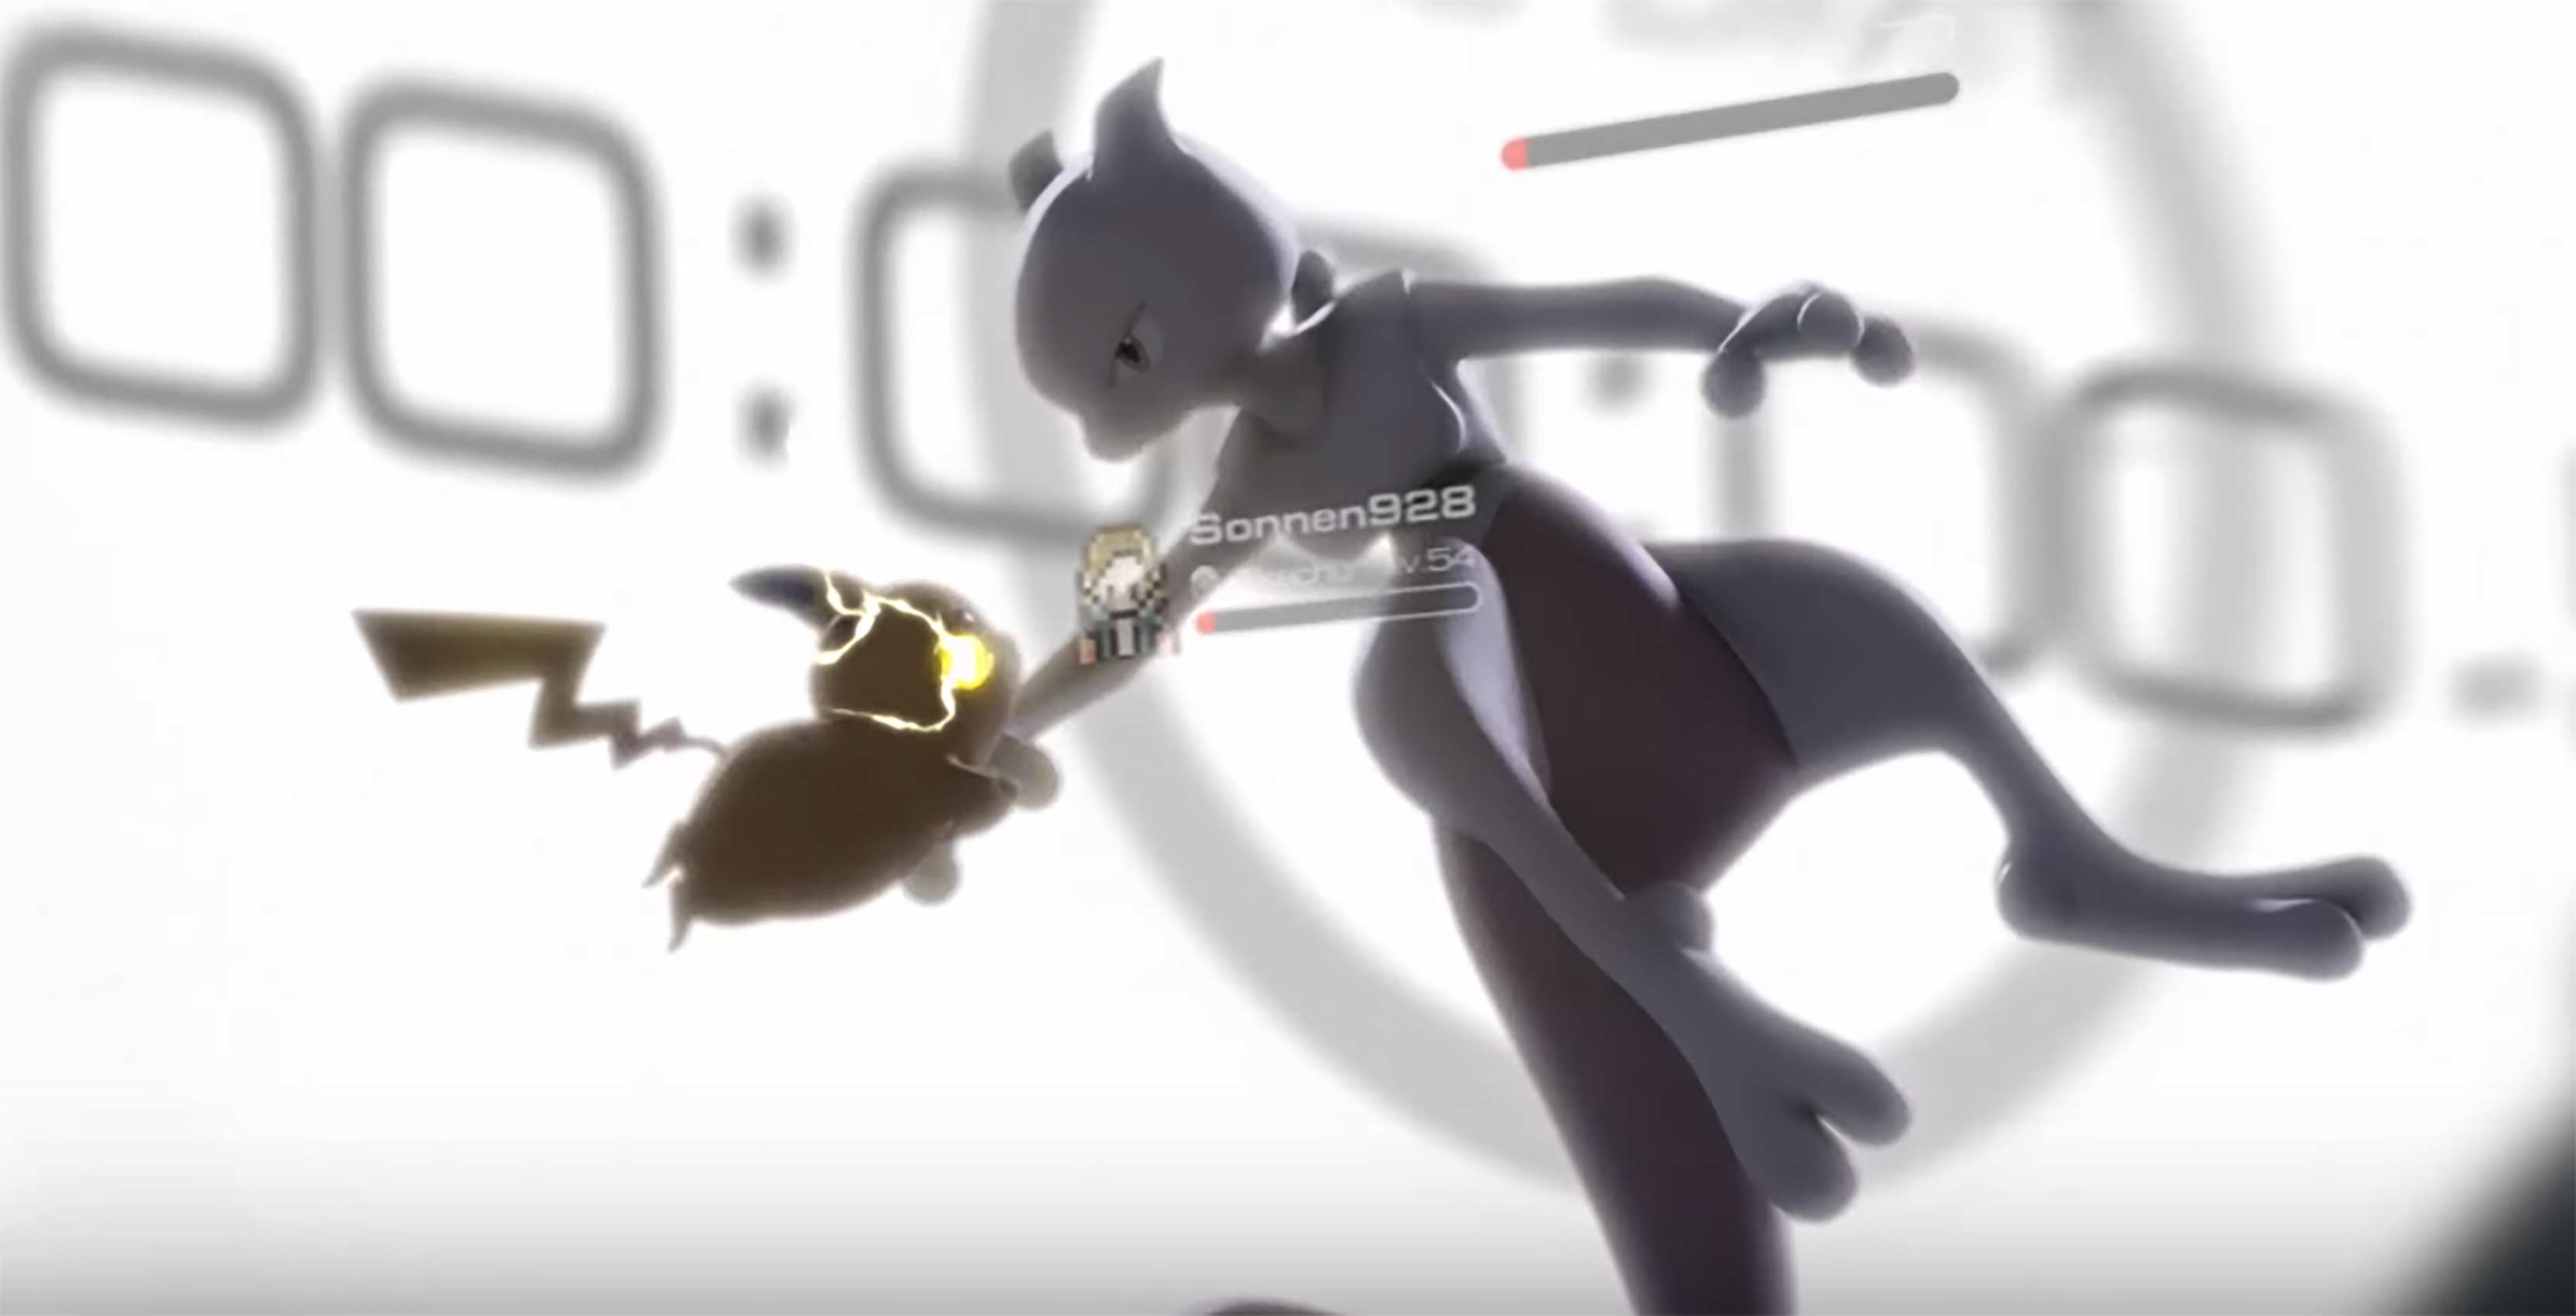 Pikachu and Mewtwo fighting in Pokemon GO announcement trailer